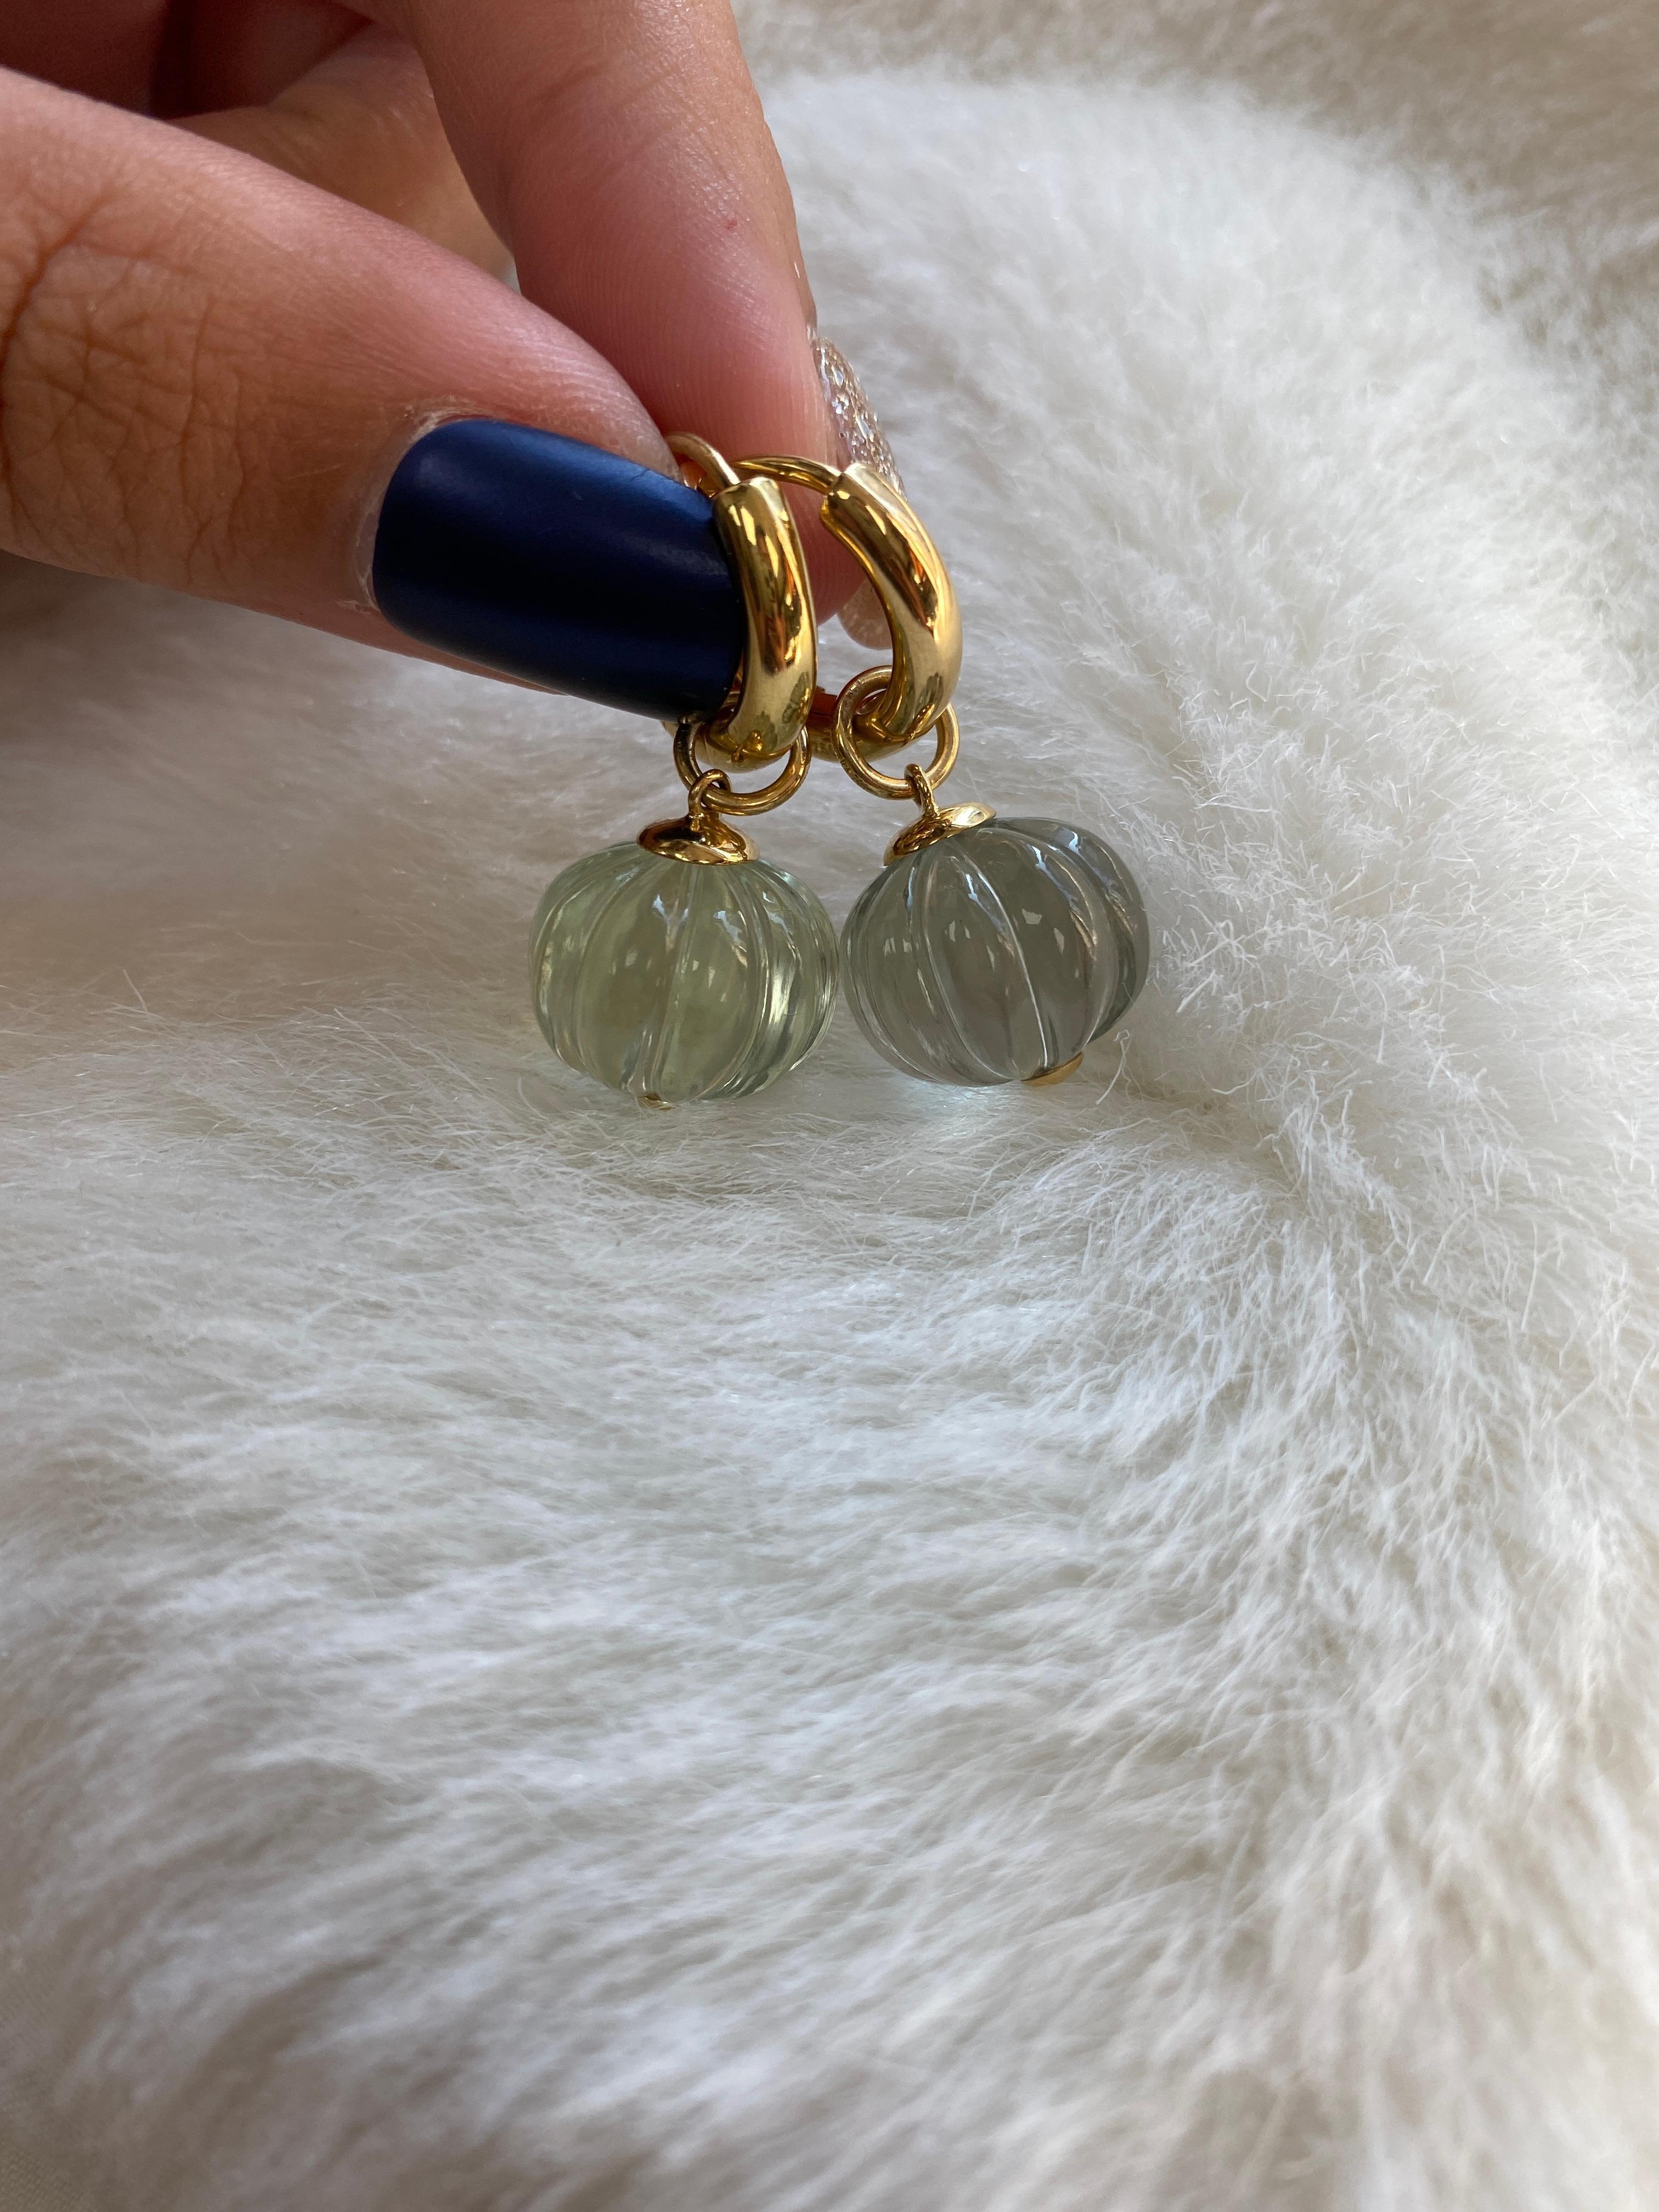 The Prasiolite Fluted Round Bead Double Loop Earrings in 18K Yellow Gold are a stunning piece of jewelry that exudes elegance and sophistication. The earrings are crafted from high-quality 18K yellow gold, which gives them a rich and warm color that